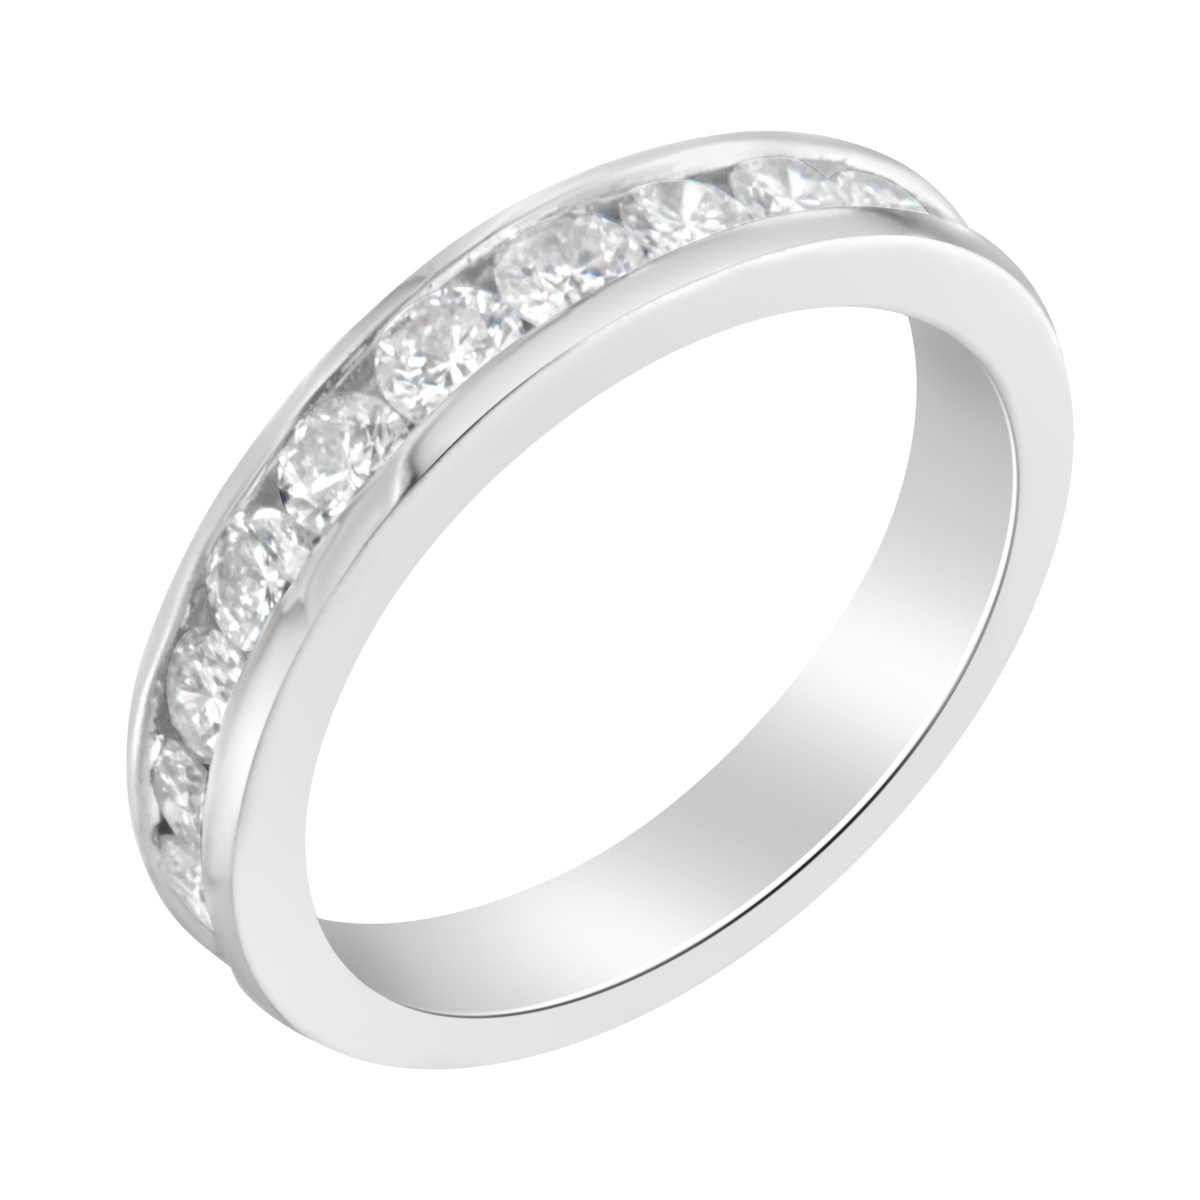 Picture of Infinite Jewels 016916R500 IGI Certified 1.0 CTTW Diamond 18K White Gold Channel-Set Half-Eternity Band Wedding Ring&#44; E-F Color - I1-I2 Clarity - Size 5